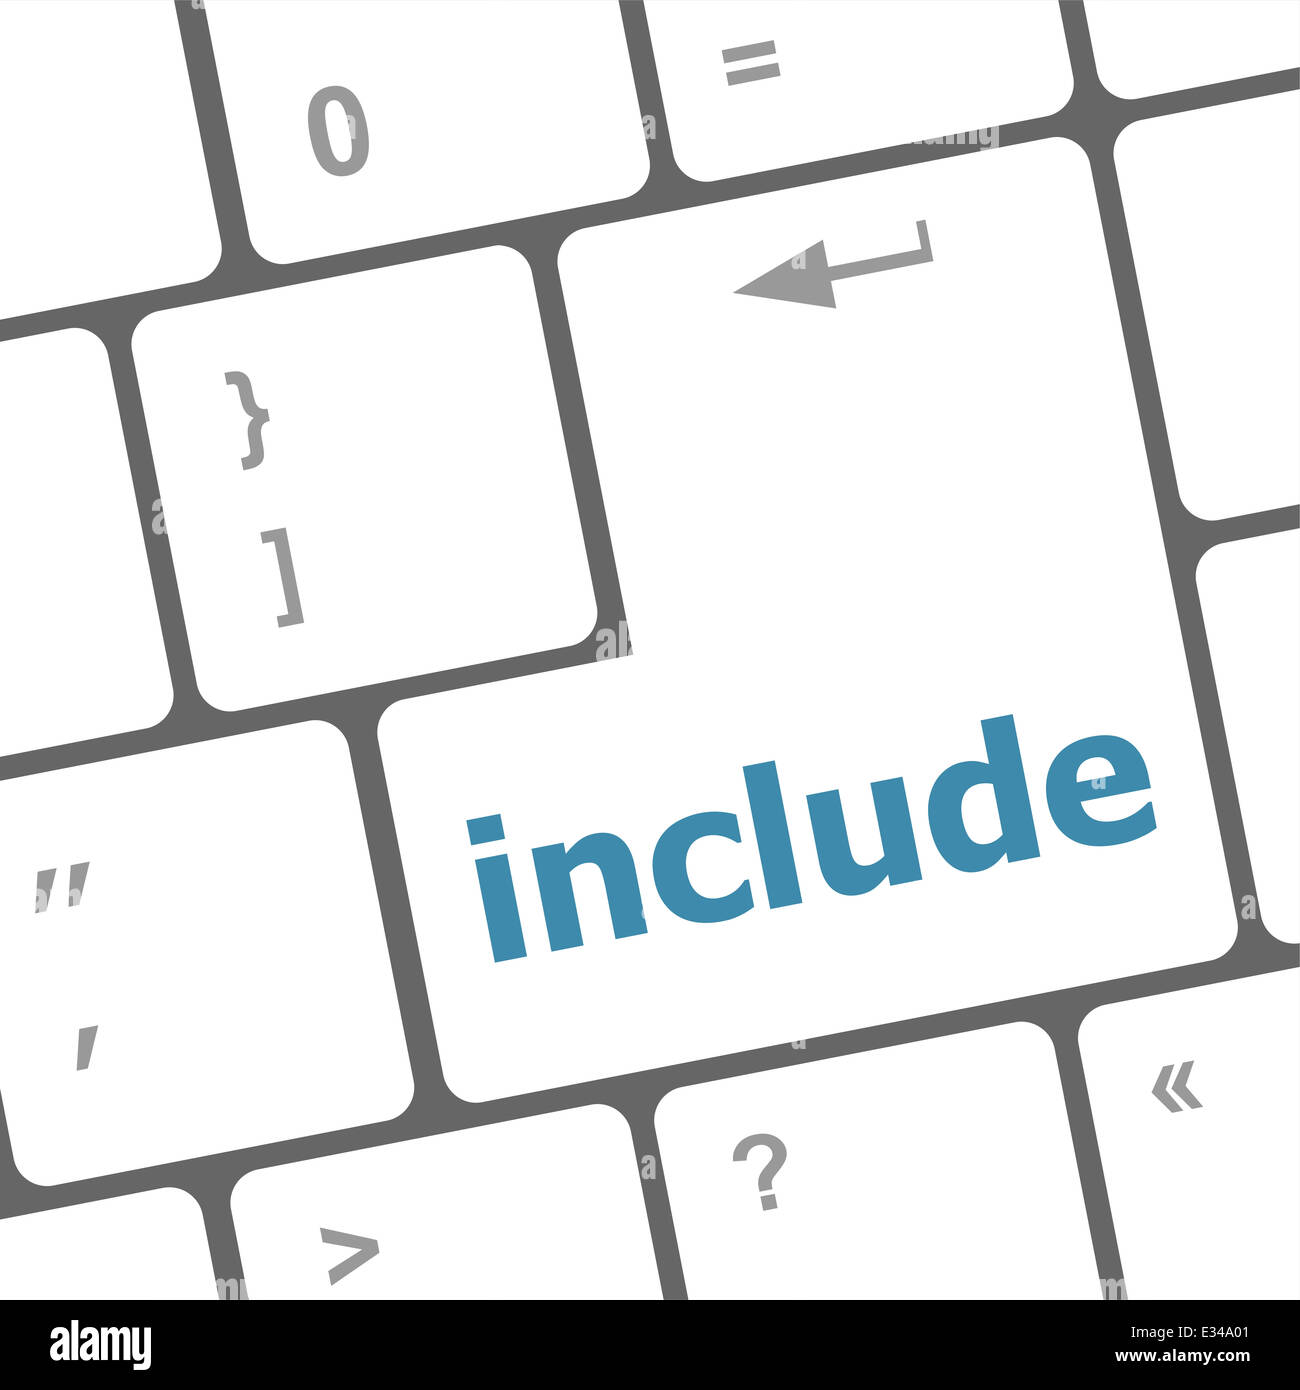 include word, social media icon on laptop keyboard Stock Photo